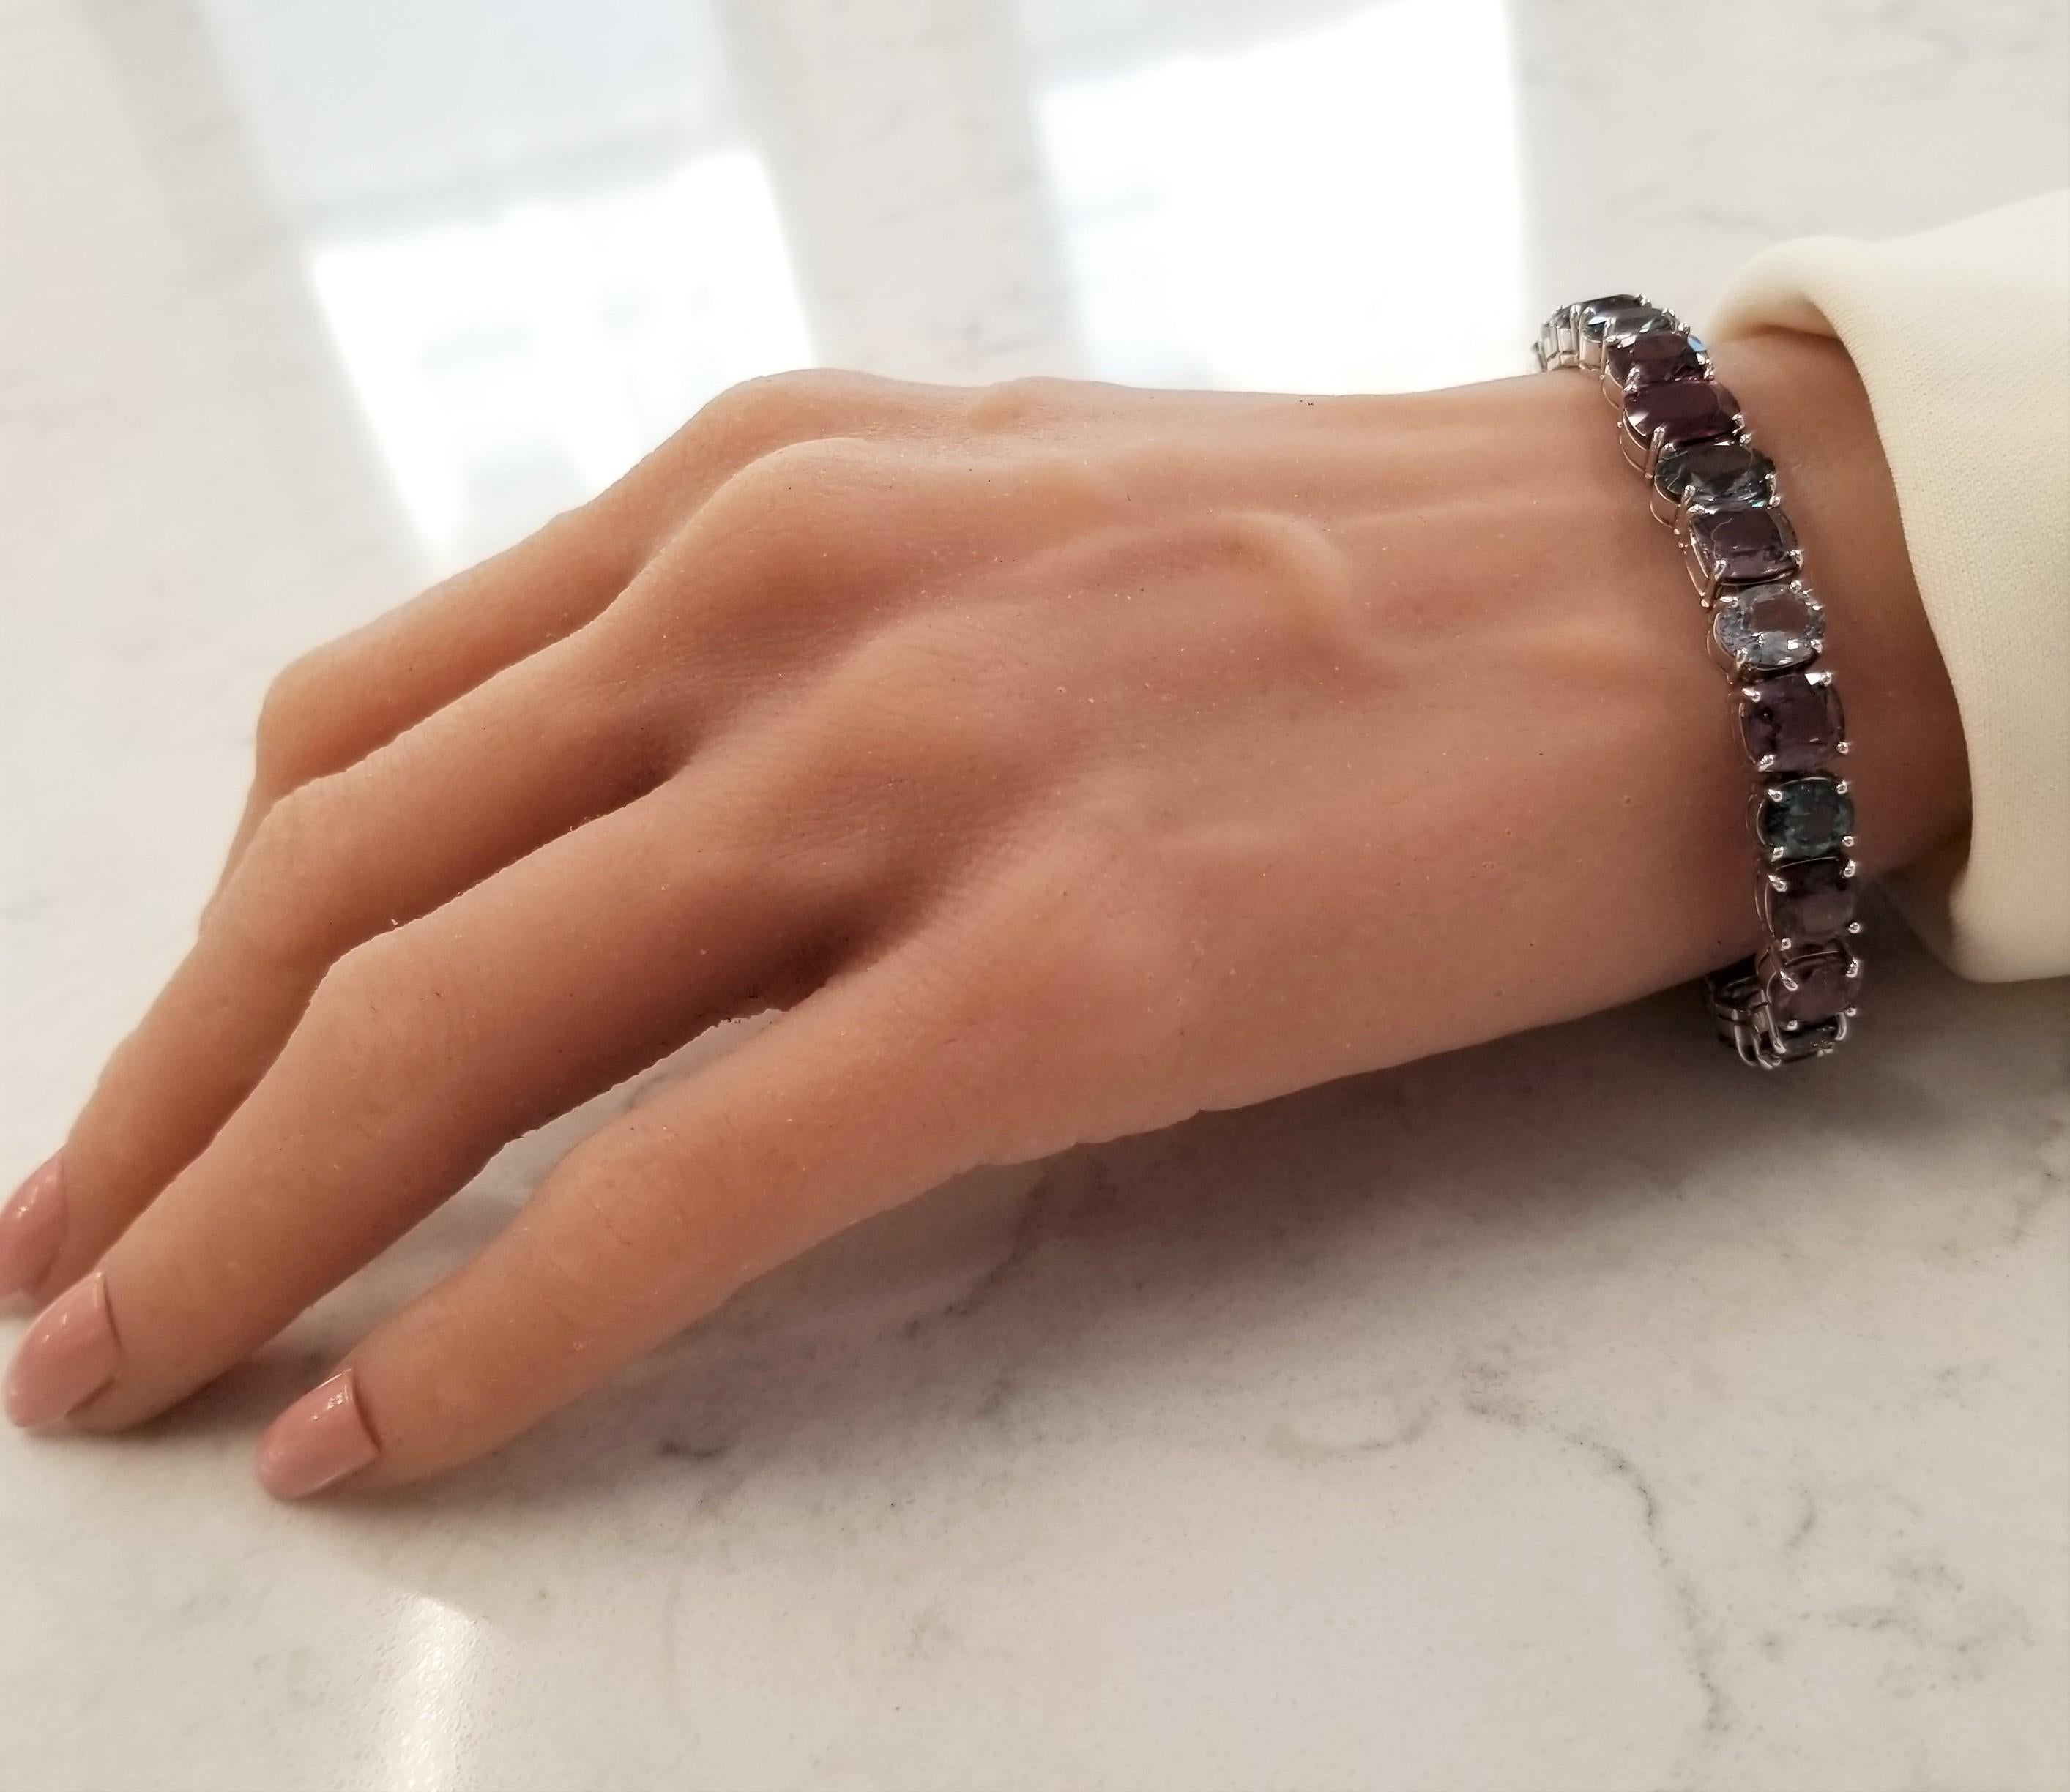 There can only be one of these gem bracelets. The gems are berry-colored natural spinel. The gem source is Sri Lanka; the luster and transparency is what you want; 39.20 carats of multi-colored raspberry and blueberry spinels make up this straight